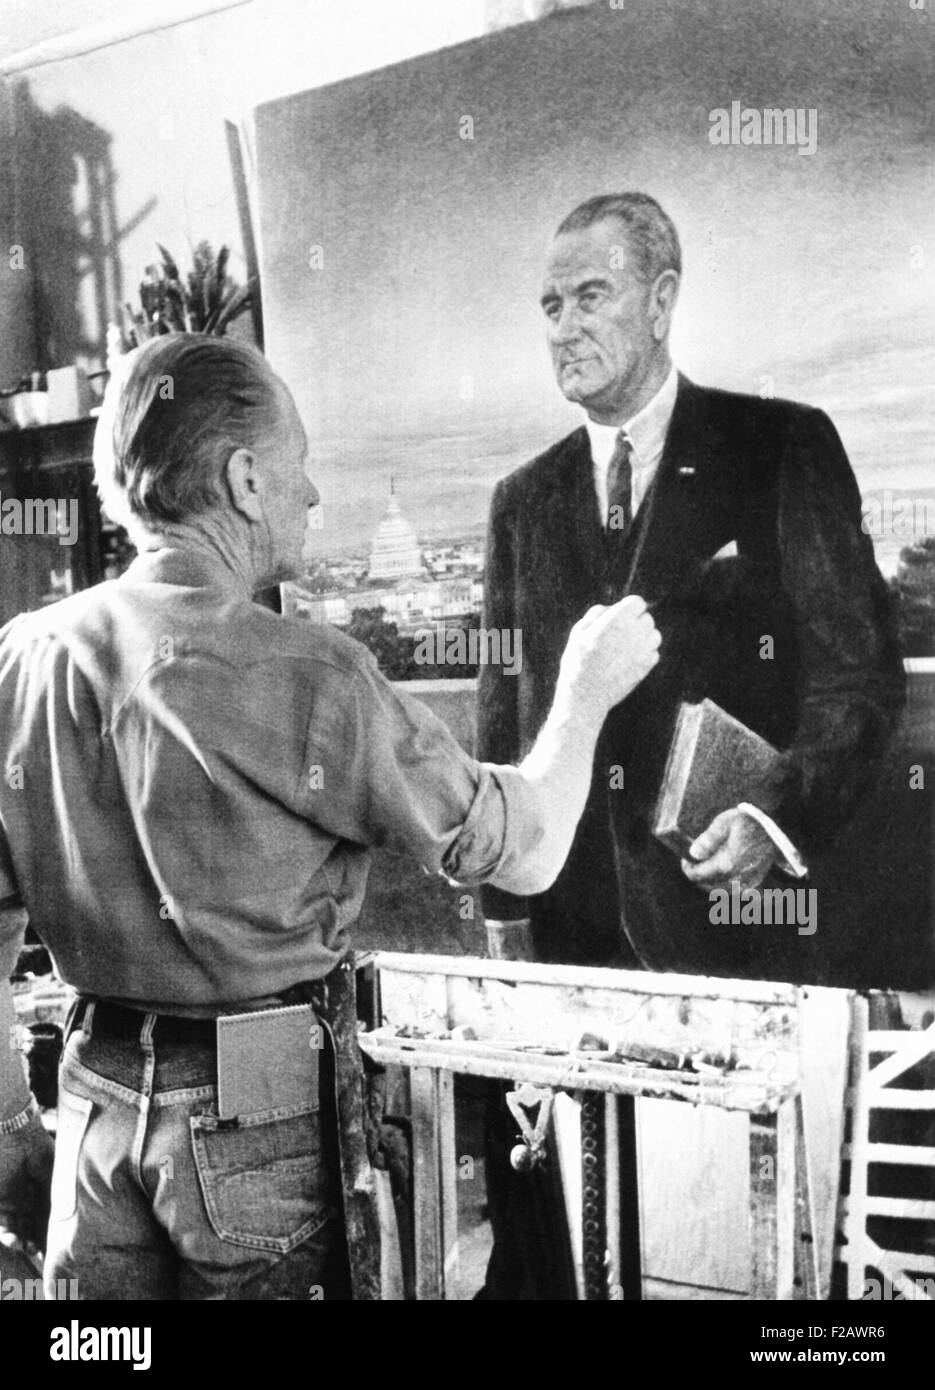 Artist Peter Hurd finishing the official White House portrait of President Lyndon Johnson. Jan. 27, 1966. The painting commissioned by the White House Historical Association was rejects by LBJ, as 'the ugliest thing I ever saw.' It is now in the National Portrait Gallery. (CSU 2015 11 1229) Stock Photo